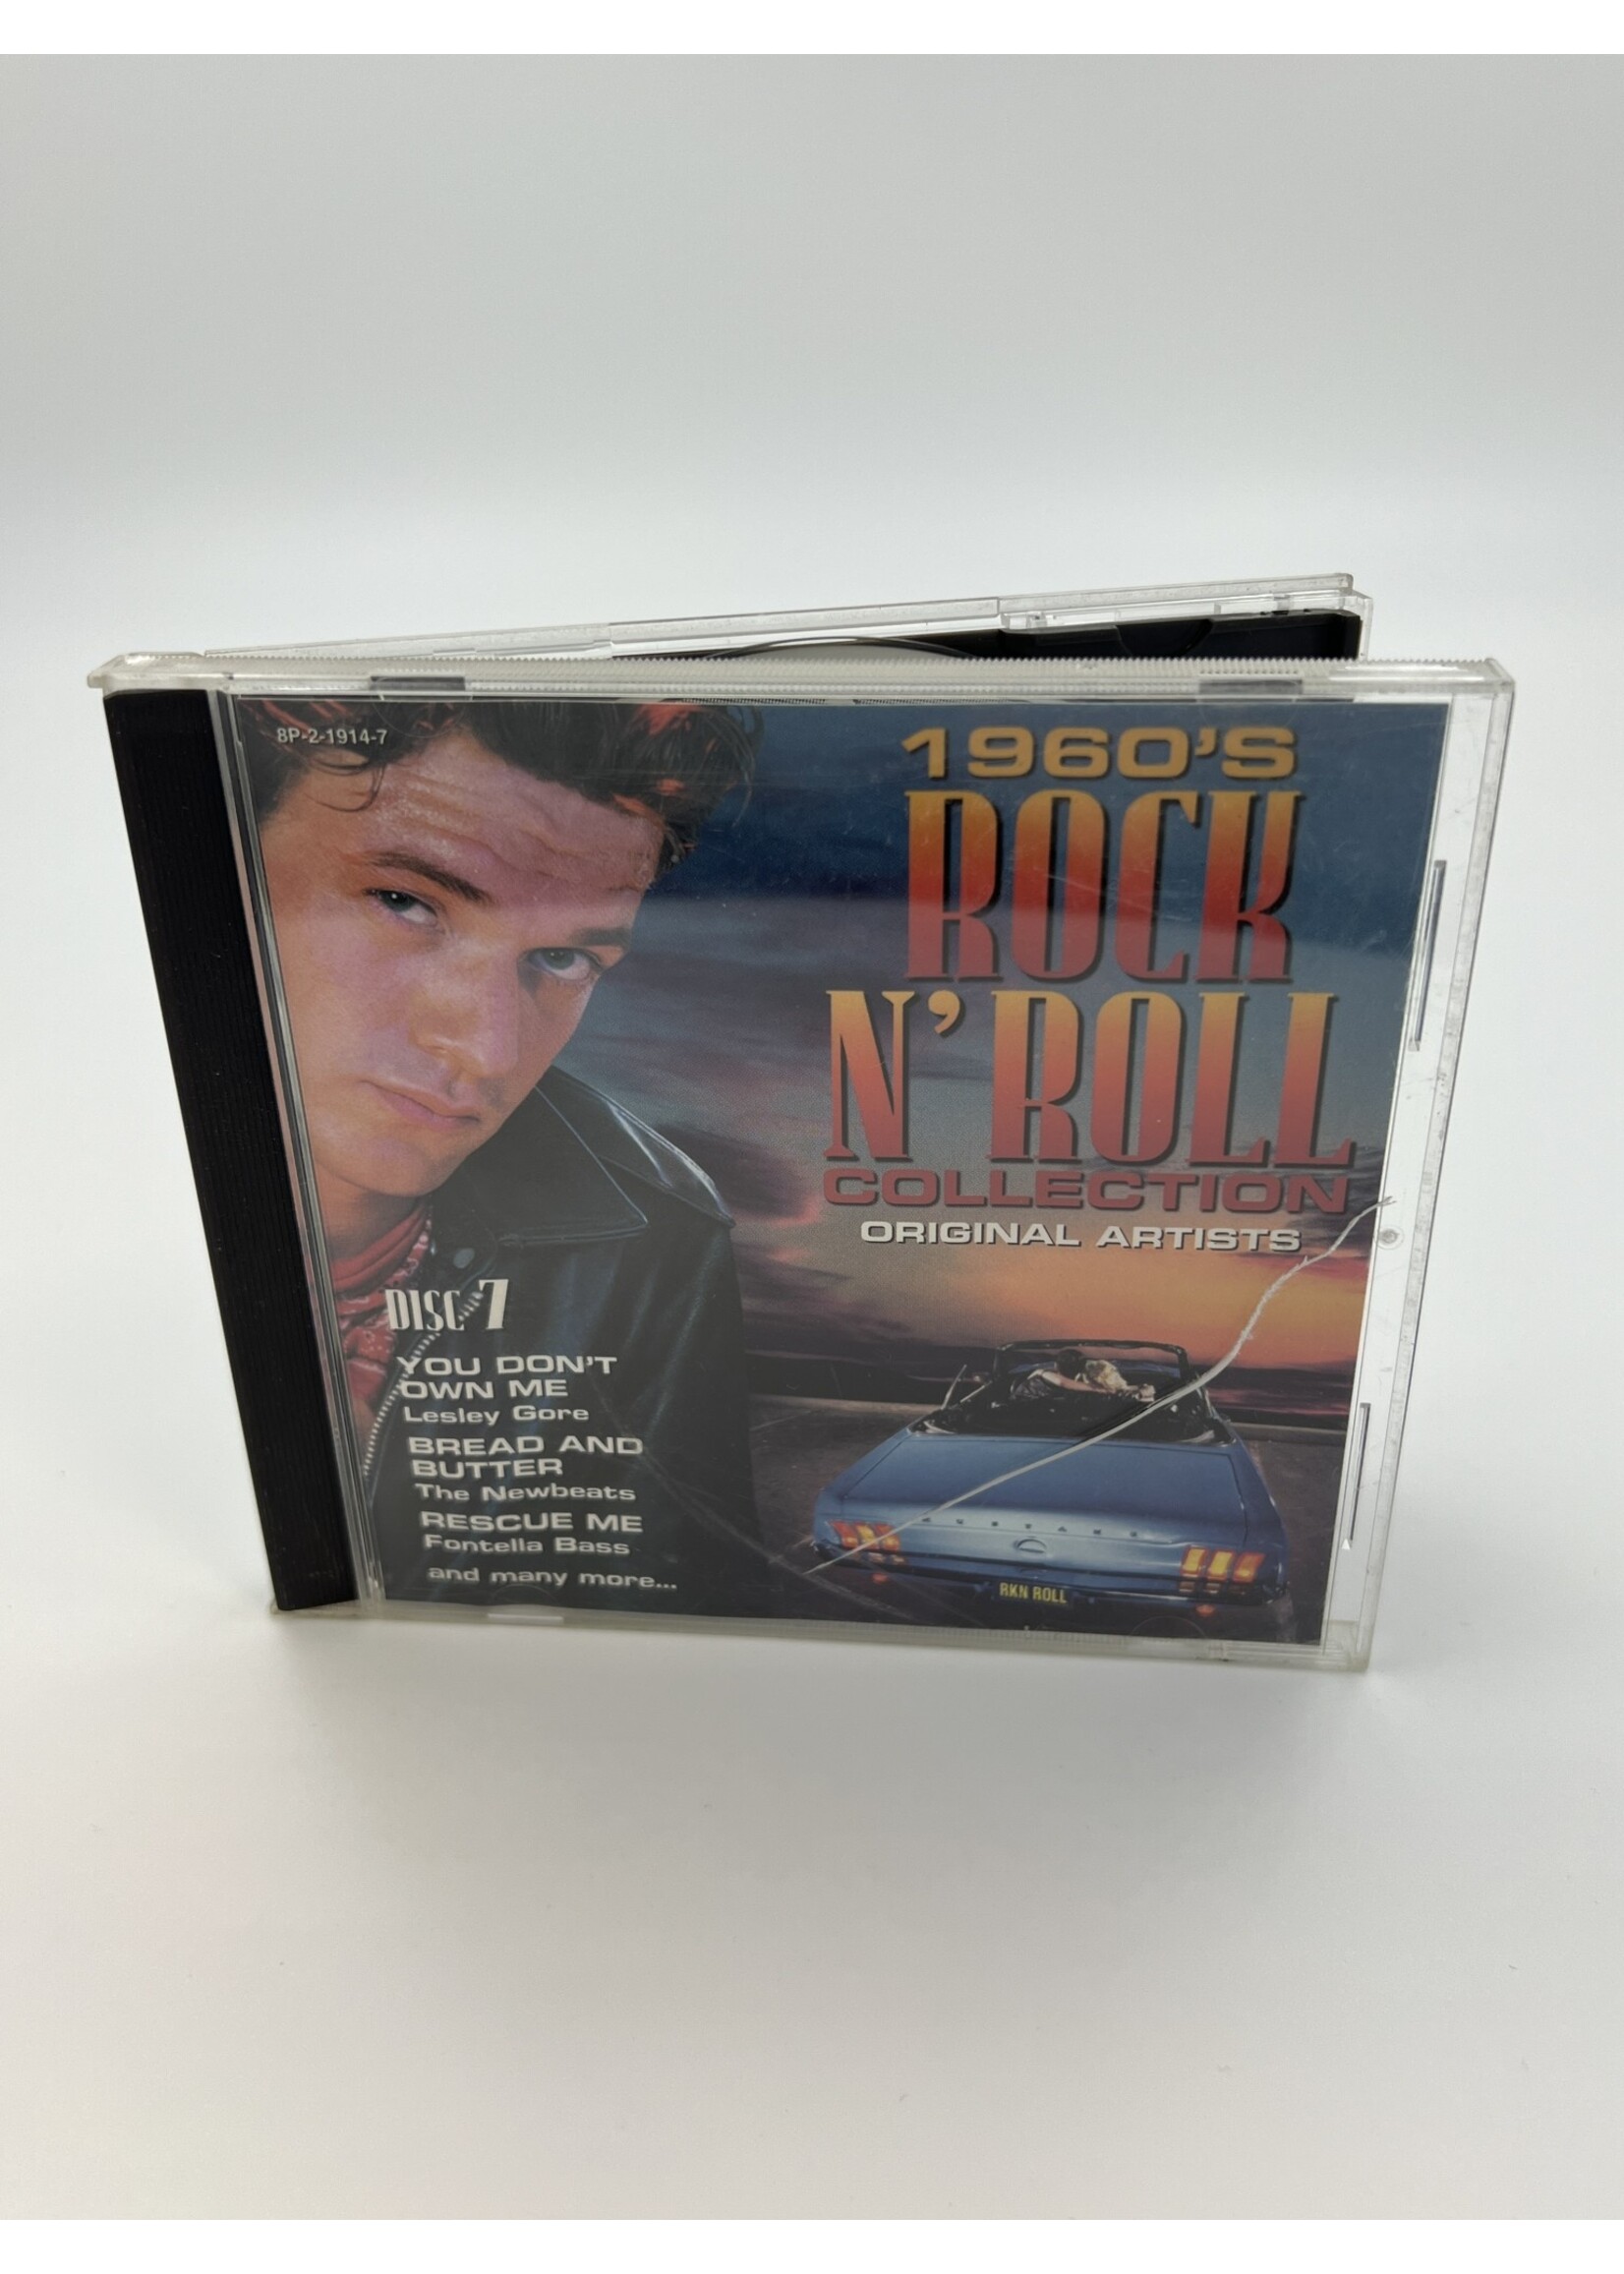 CD 1960s Rock N Roll Collection Disc 7 CD